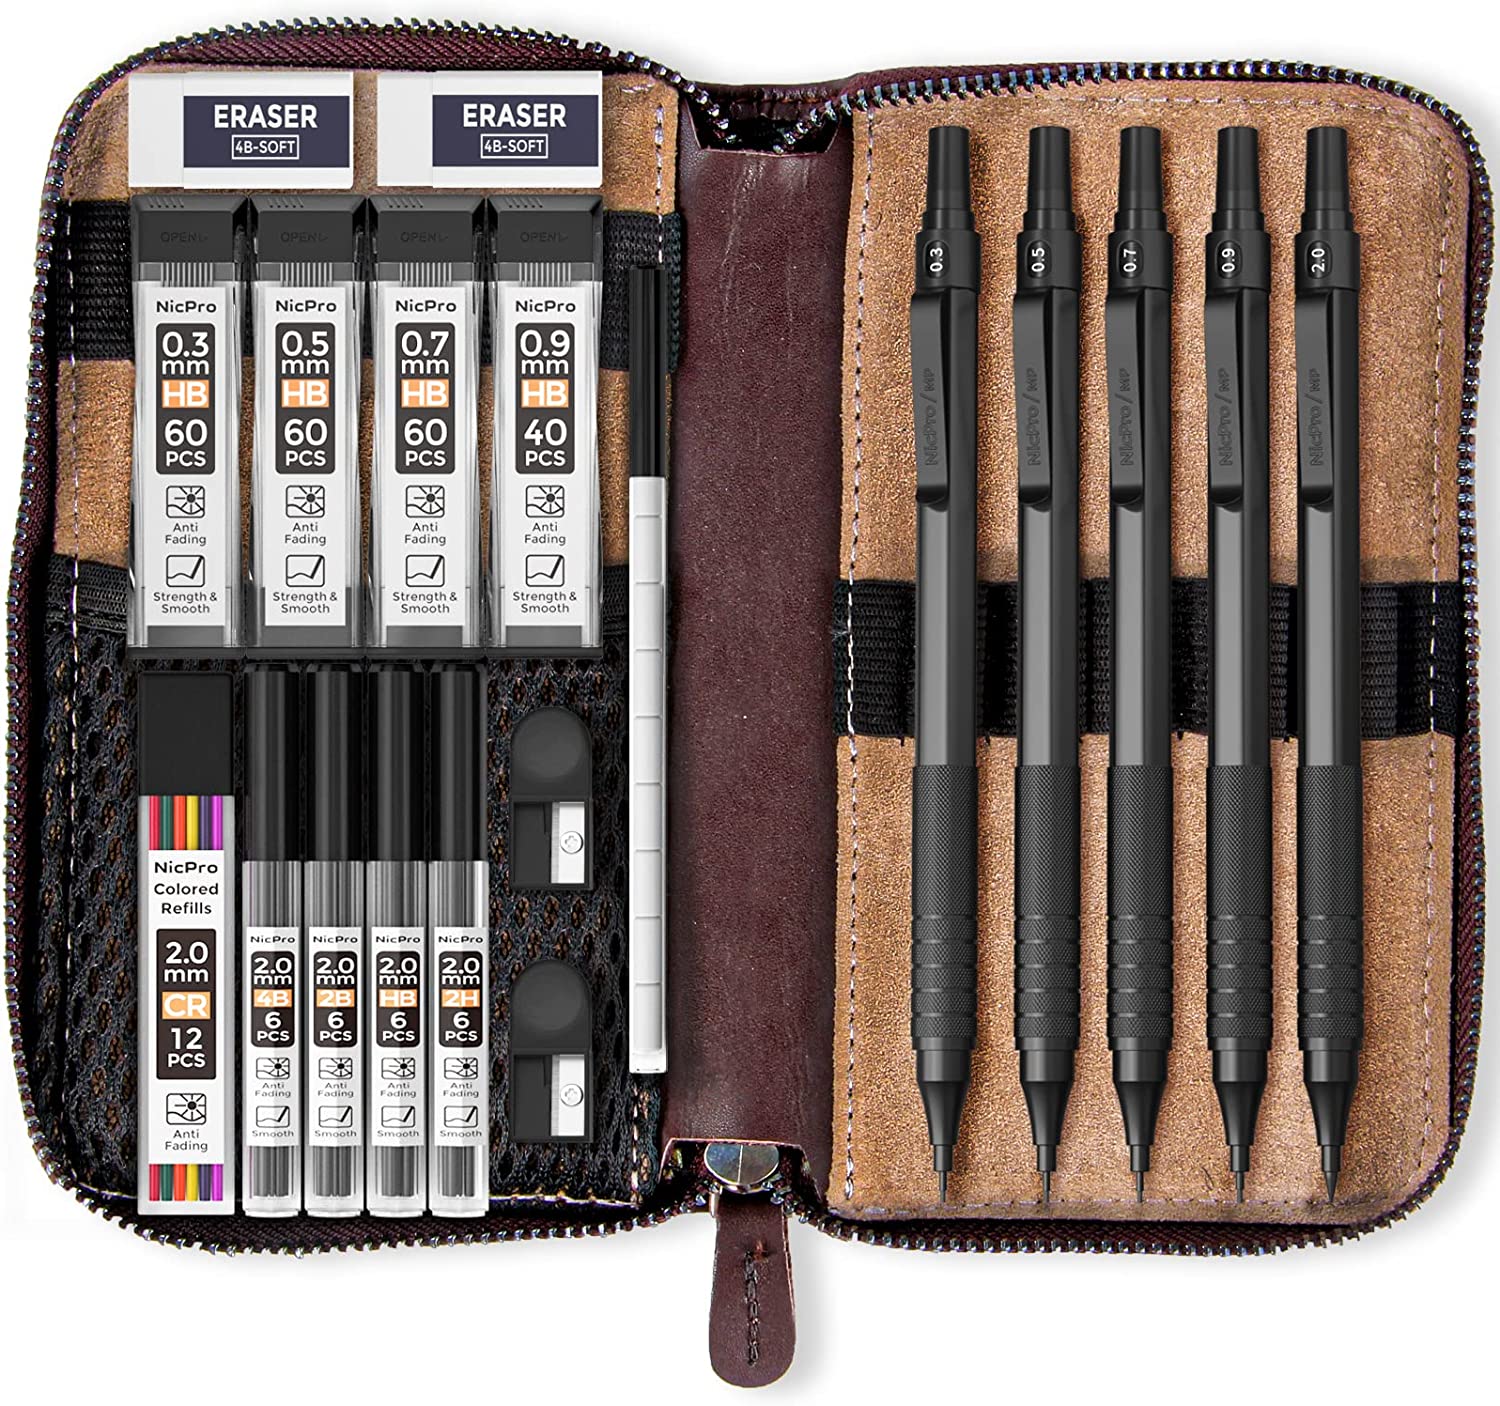 Nicpro 20PCS Black Metal Mechanical Pencil Set in Leather Case, 0.3, 0.5, 0.7, 0.9 mm & 2mm Lead Pencil Holders, 9 Tube (4B 2B HB 2H) Lead Refills, Erasers For Art Drafting Sketching Drawing